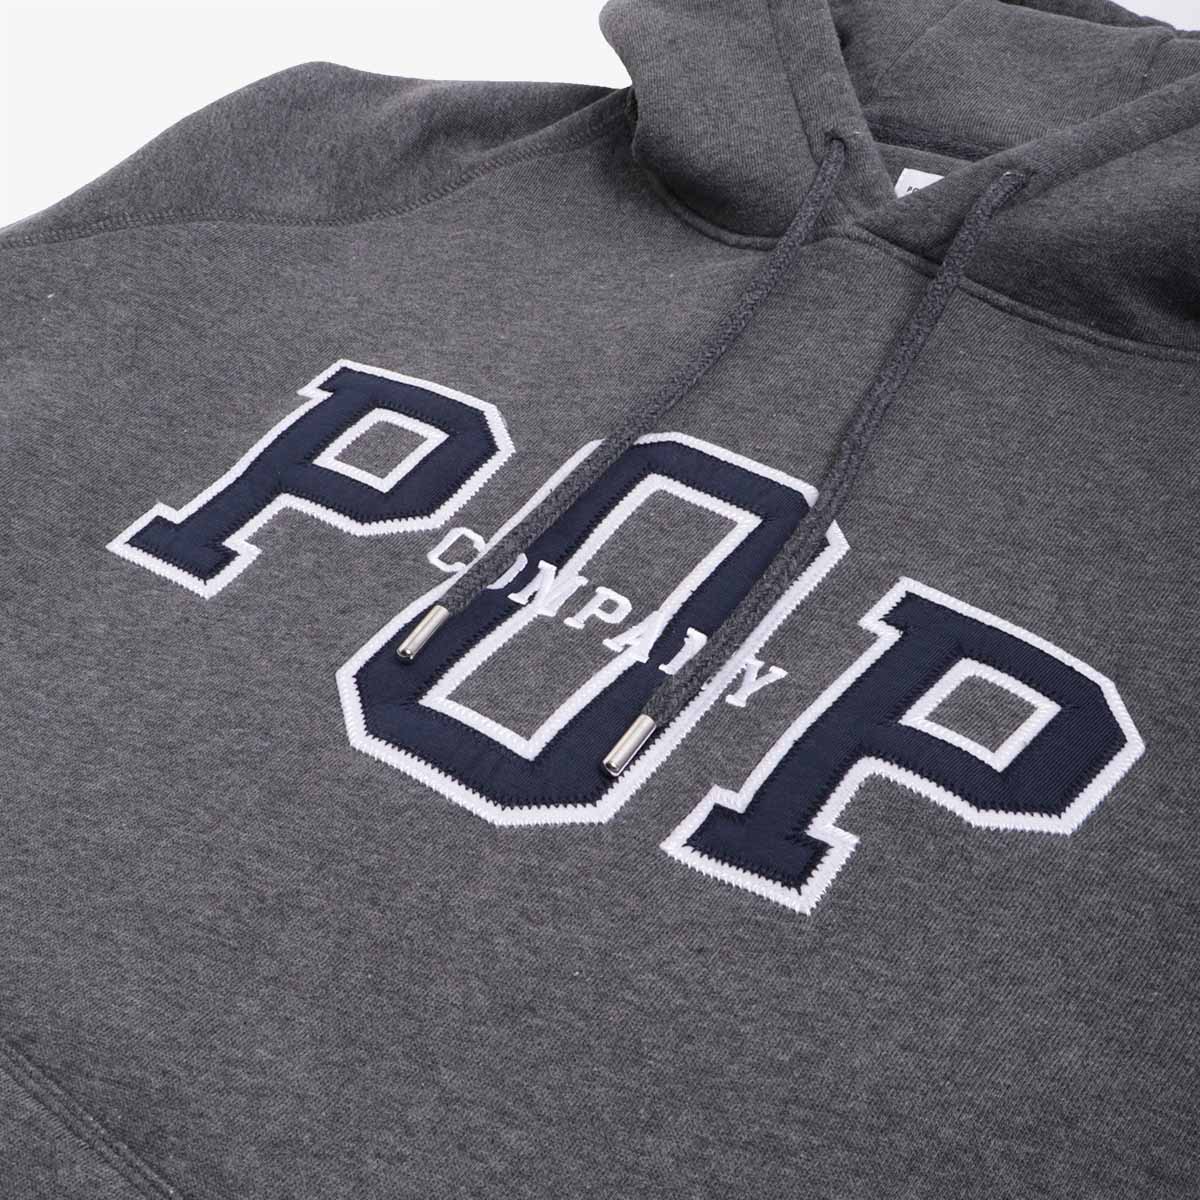 Pop Trading Company Hoodie, Charcoal Heather, Detail Shot 6